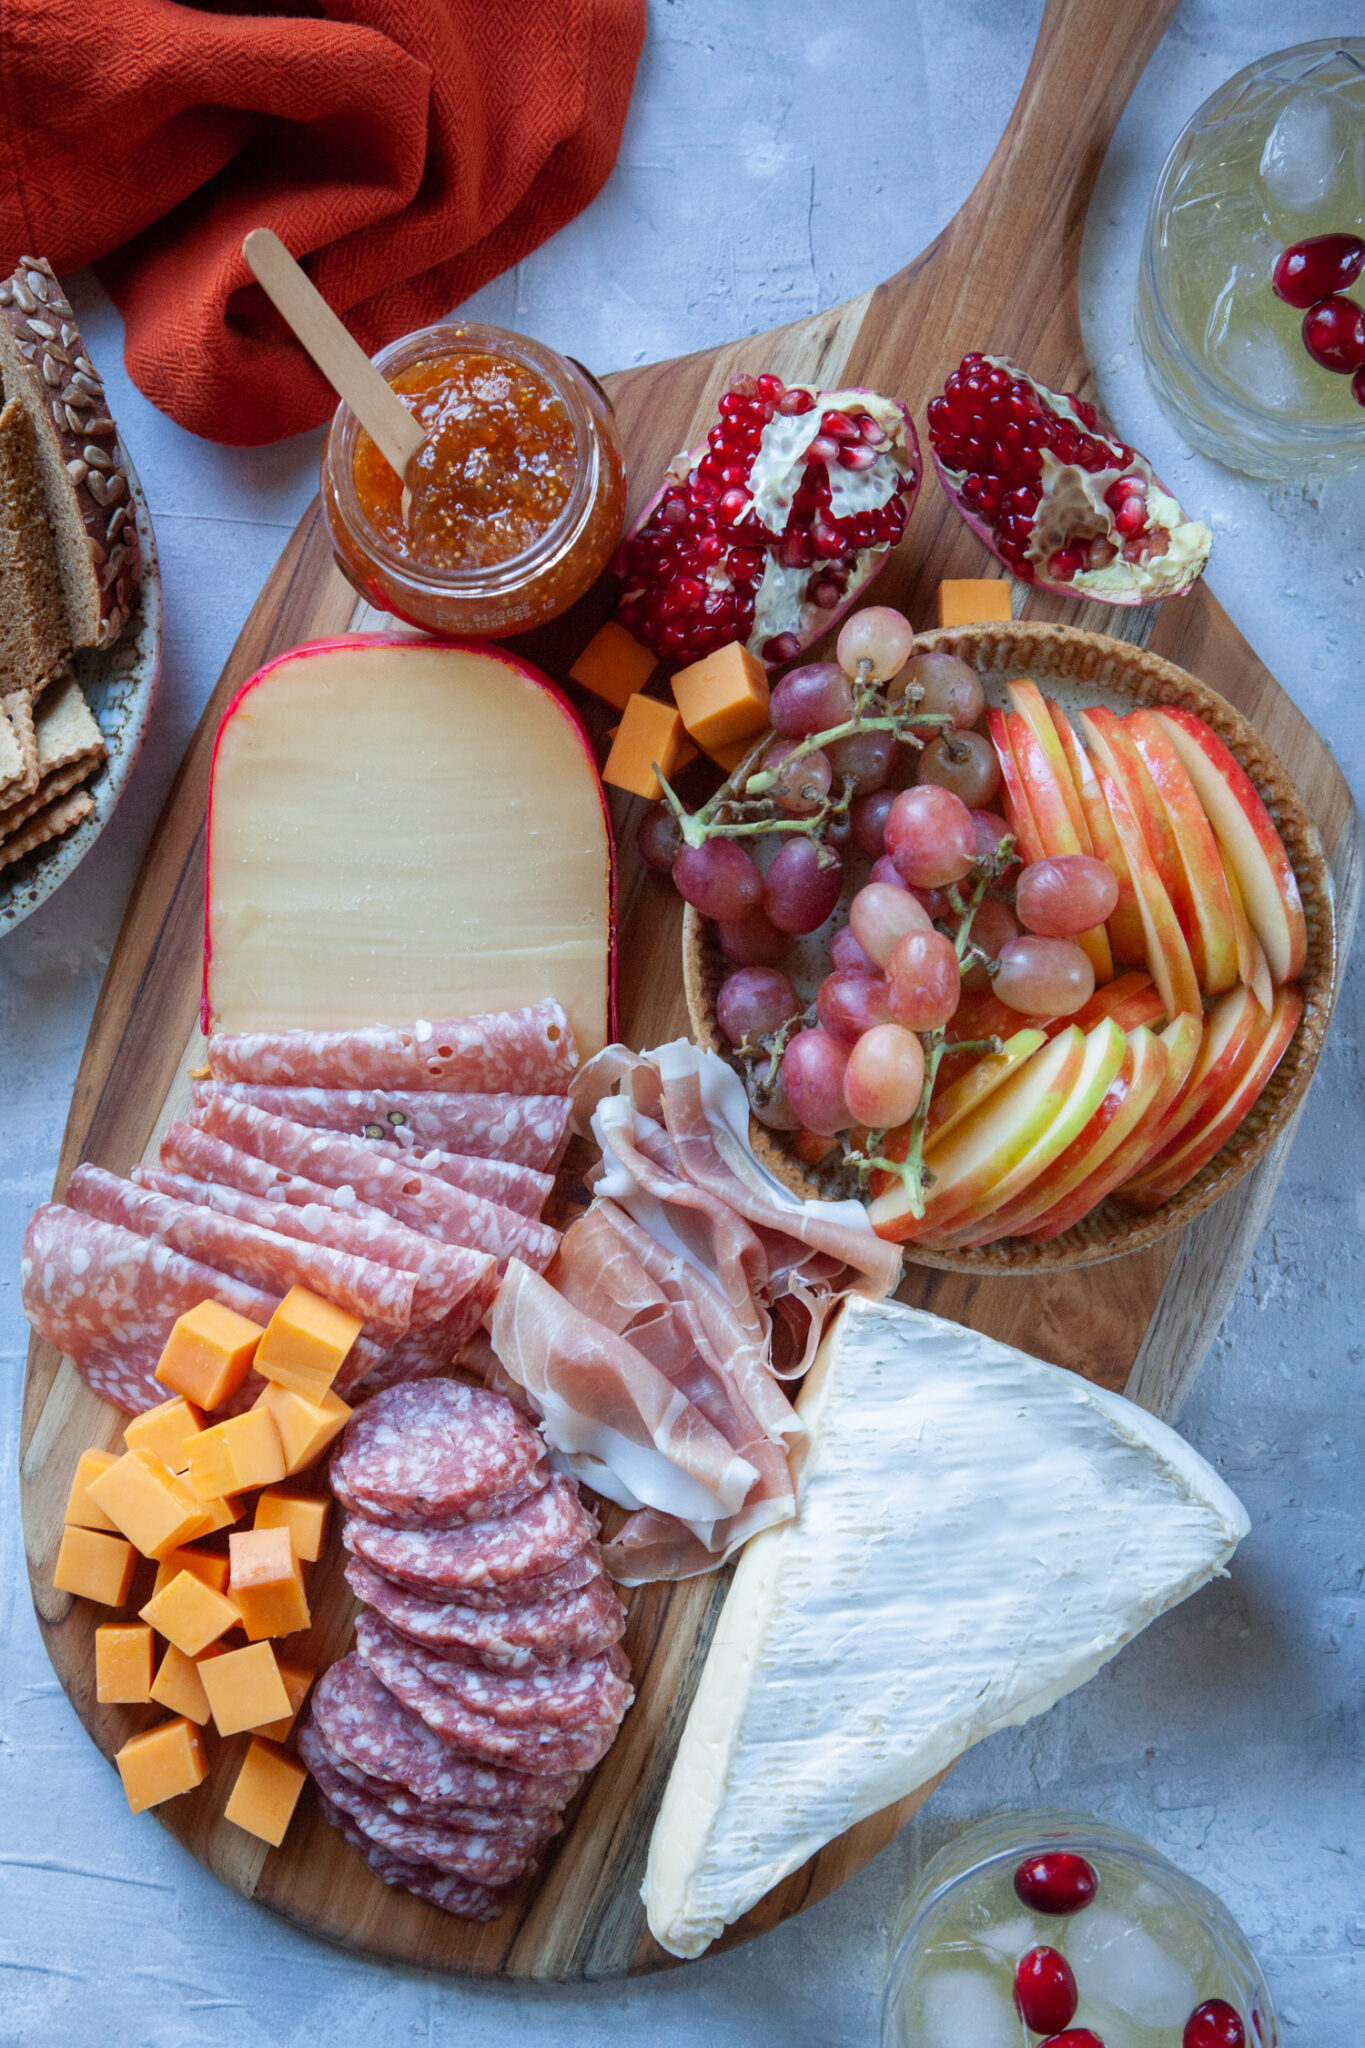 A holiday charcuterie board with cheese, charcuterie, fruit, jam crackers and bread, with a holiday cocktail next to the board.